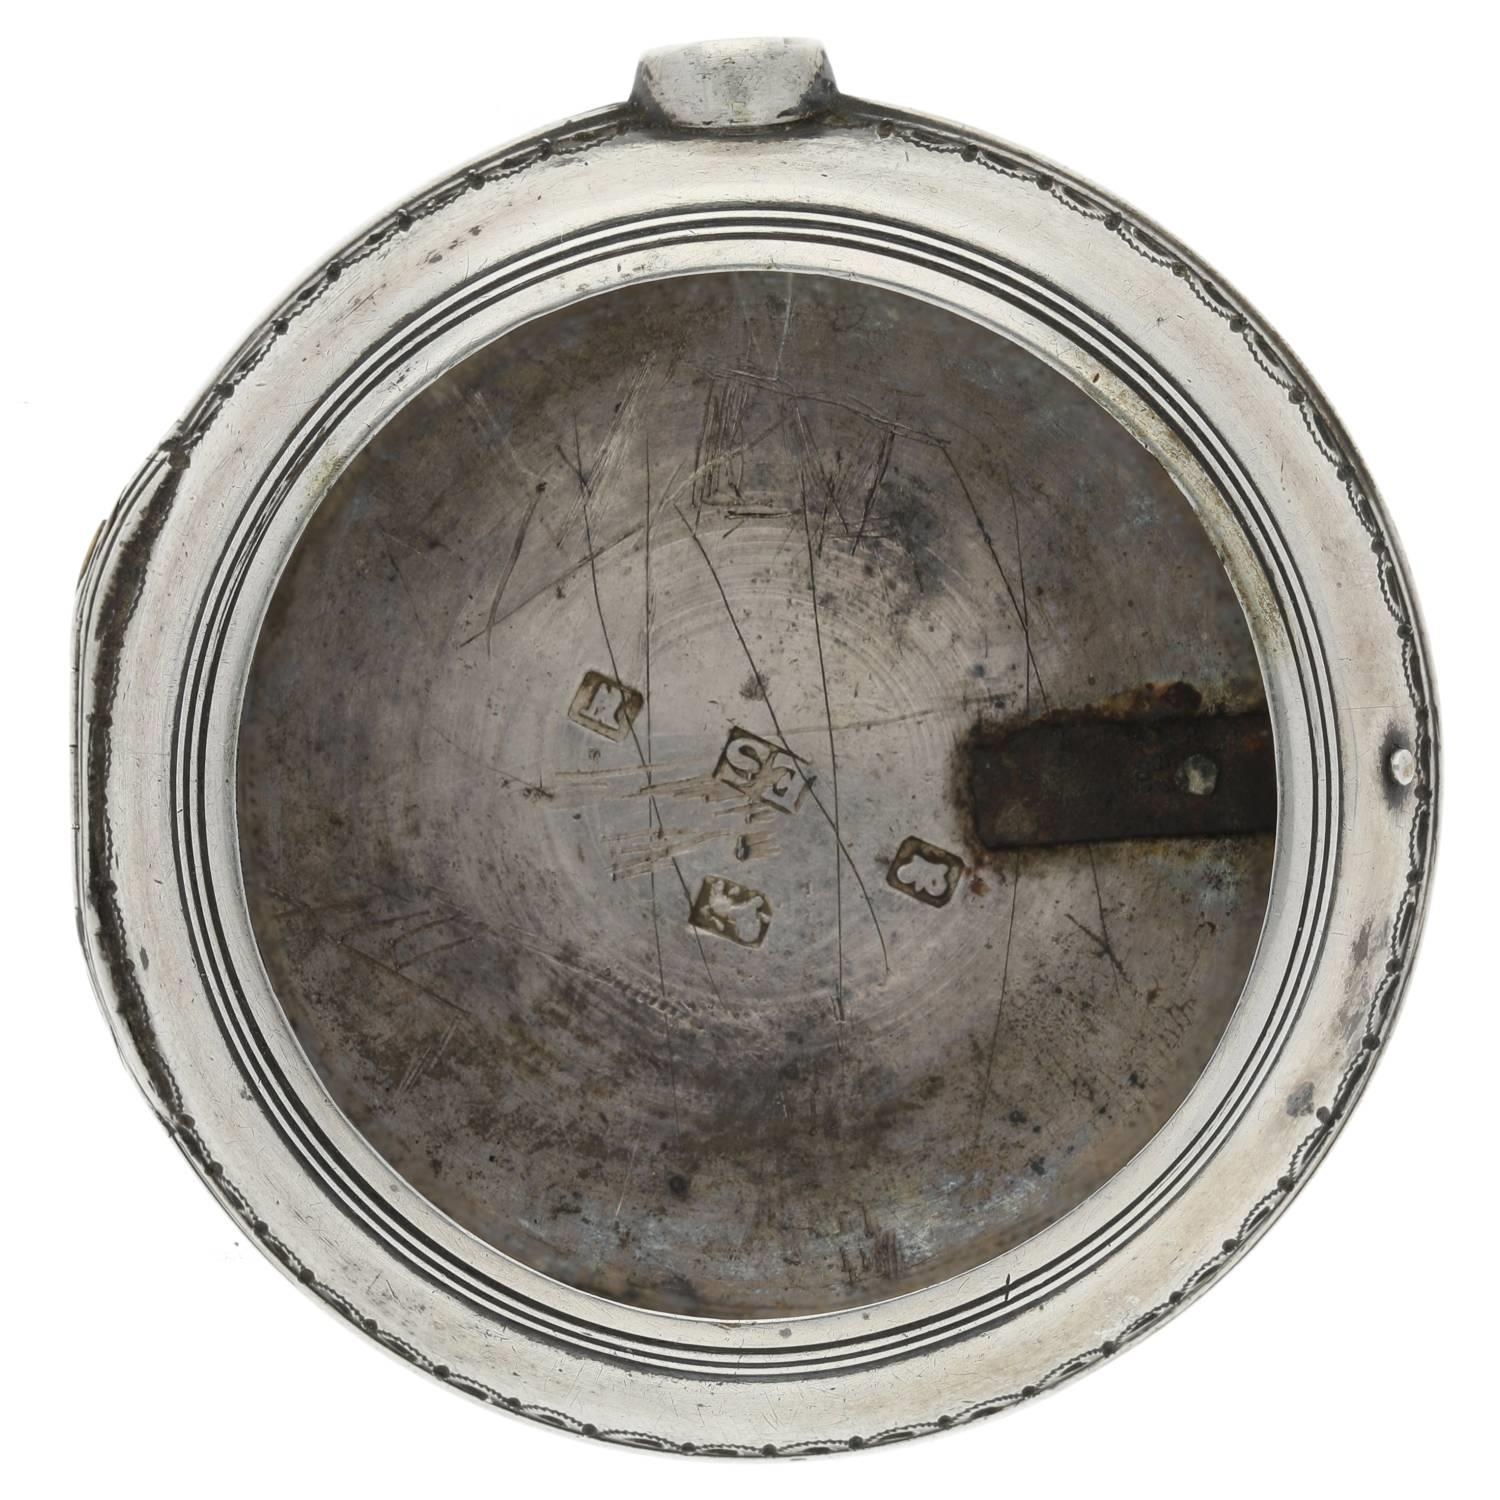 Tomson, London - English 18th century silver pair cased verge pocket watch, signed fusee movement, - Image 7 of 7